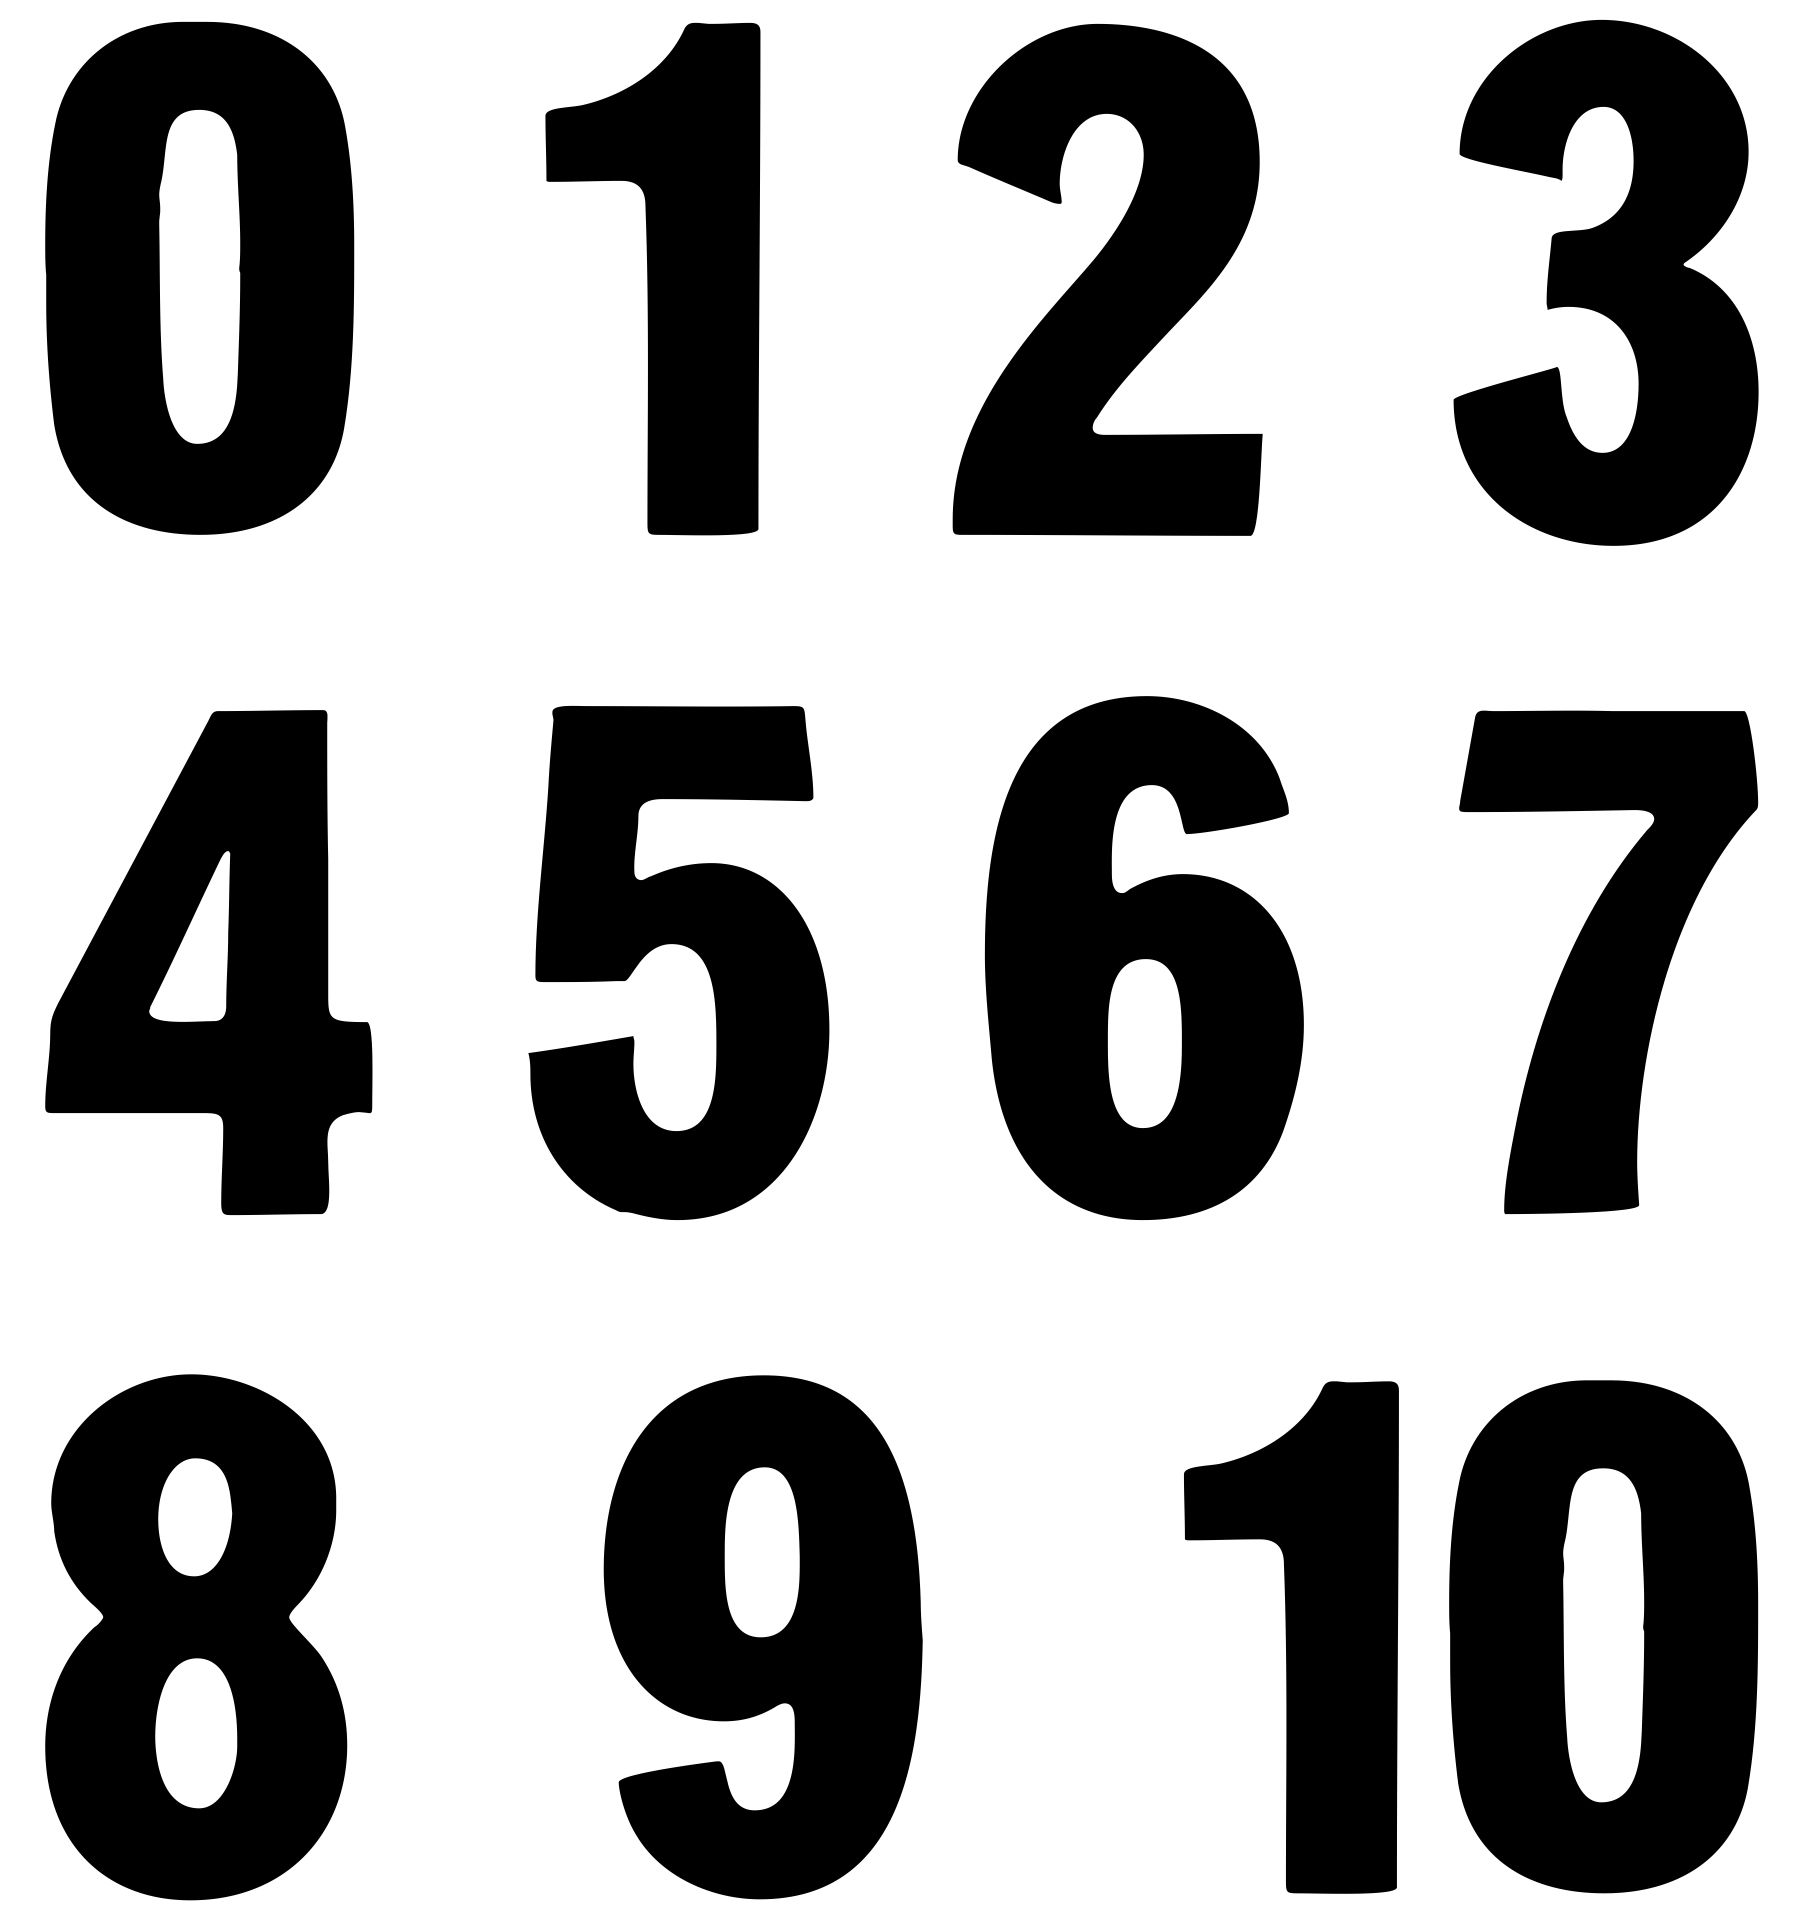 Printable Cut Out Letters - A4 Sized Numbers In Solid Black